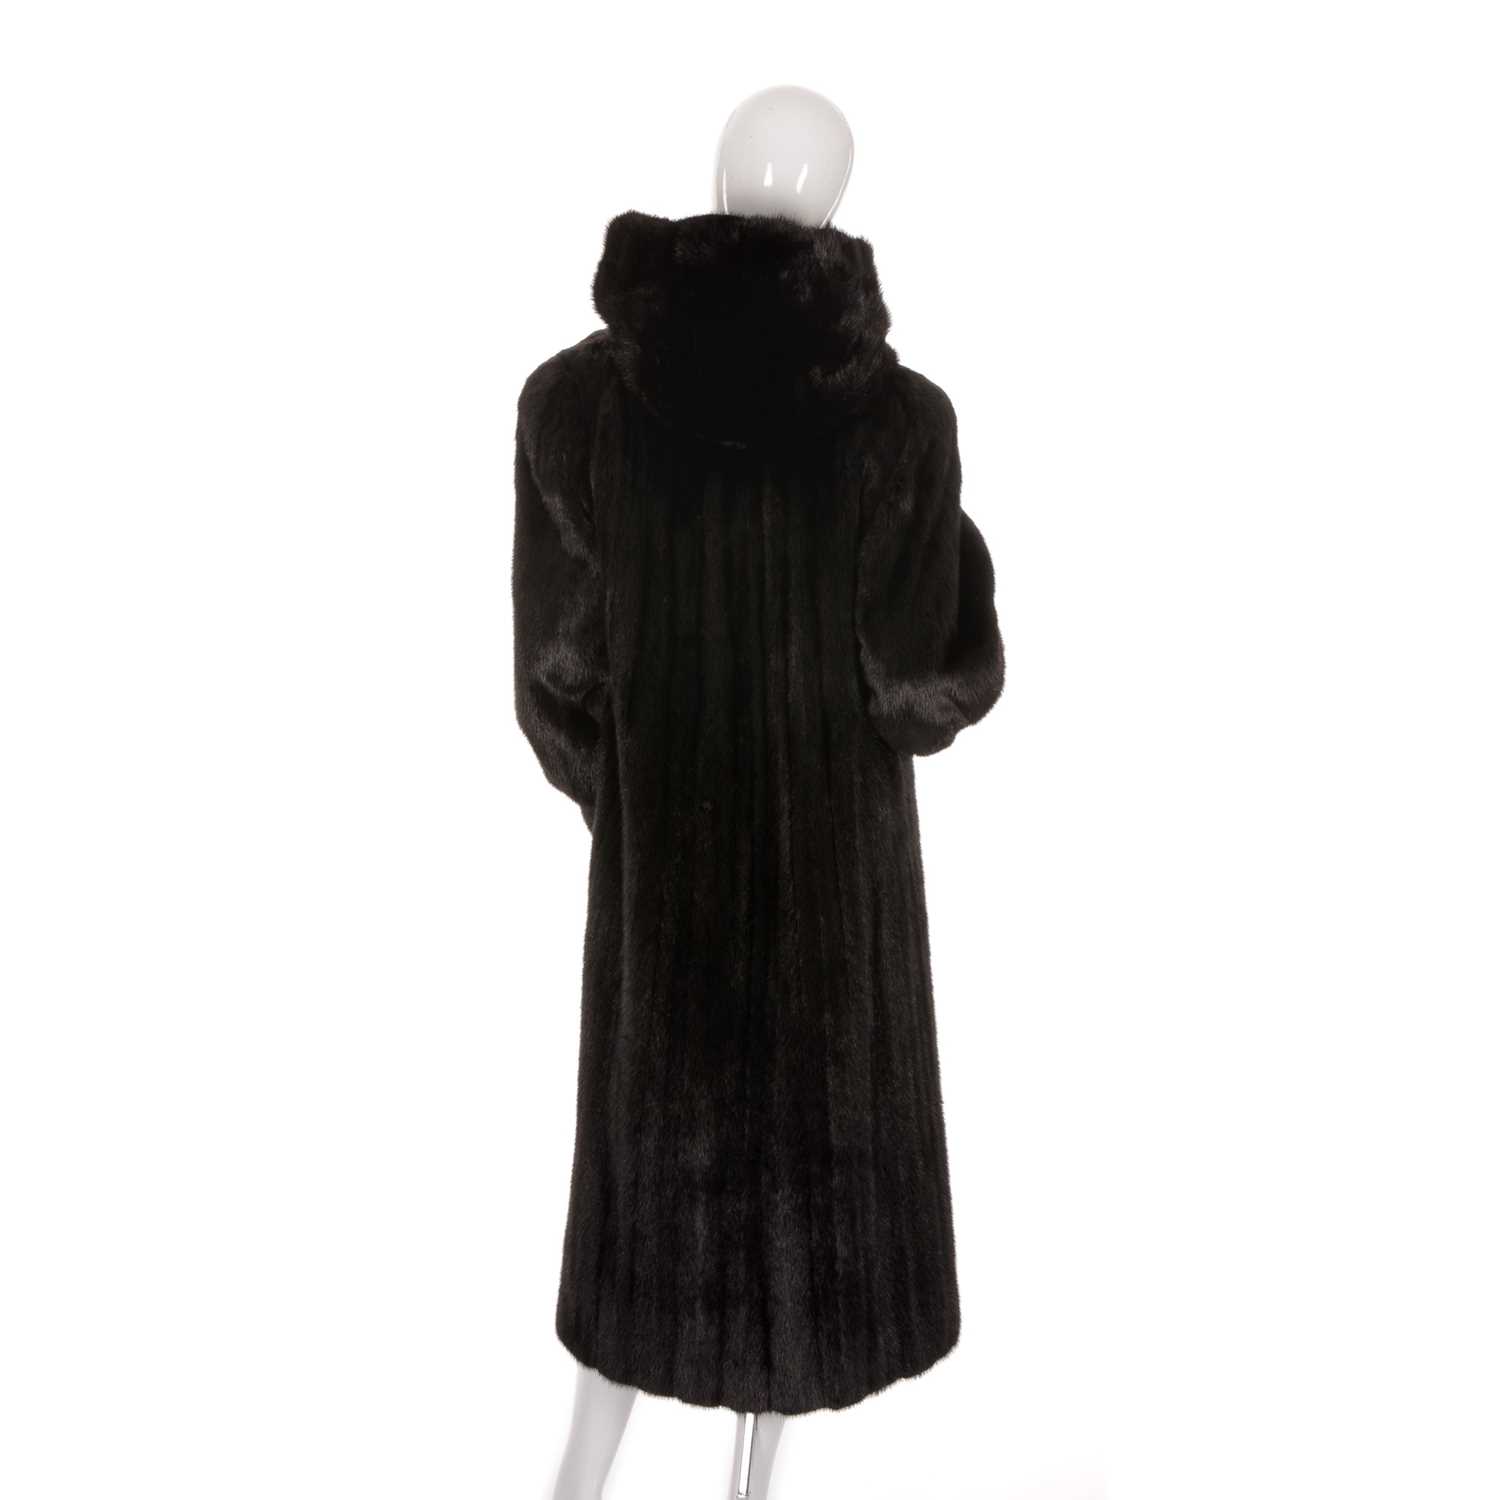 A full-length black mink hooded coat, featuring hook and eye clip fastenings, fitted cuffs, a - Image 3 of 4